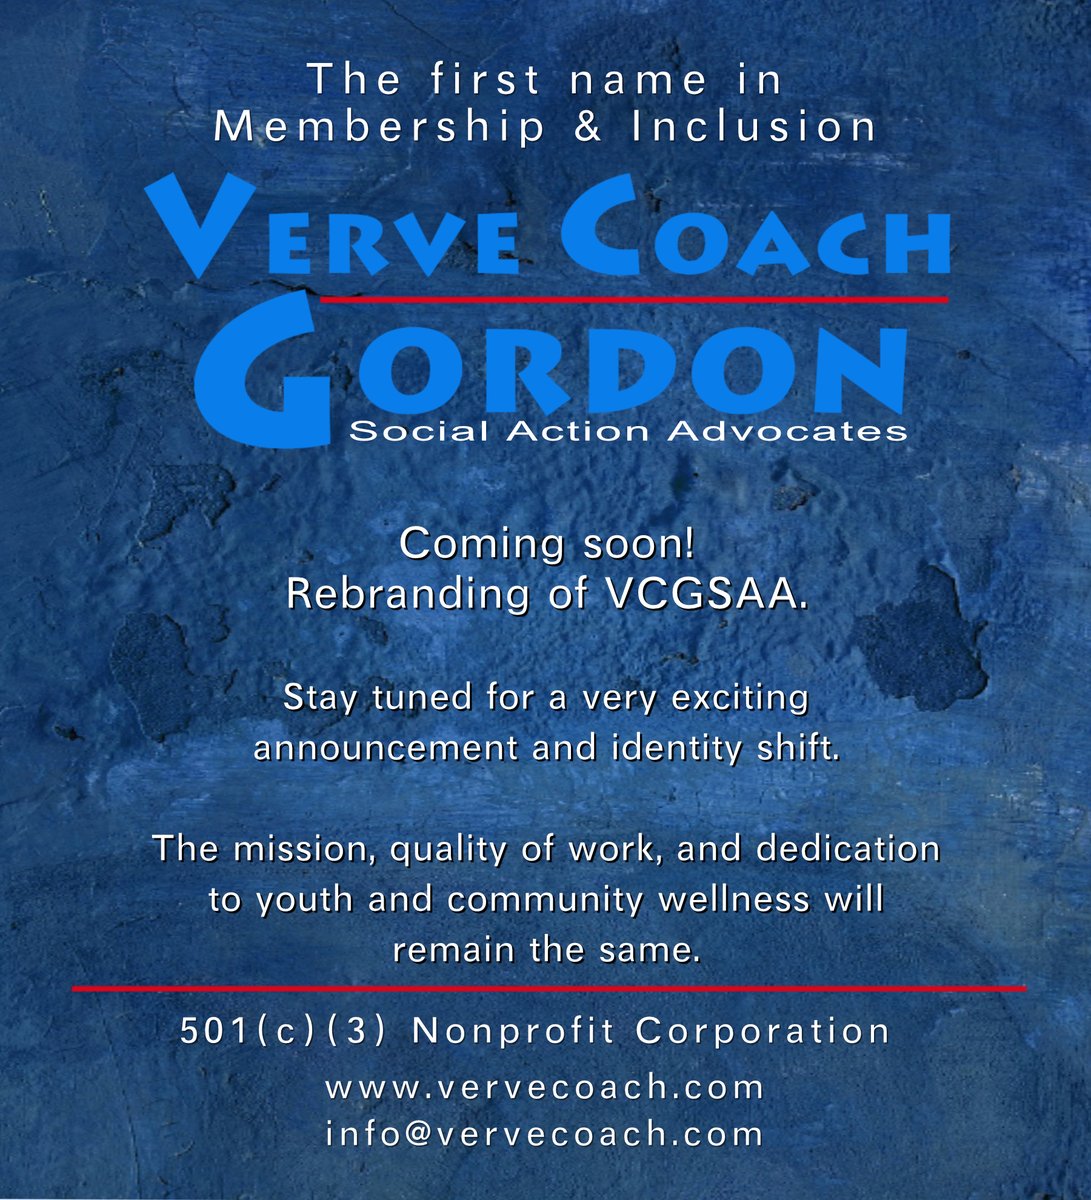 Verve Coach Gordon Social Action Advocates
The first name in Membership & Inclusion

Coming soon!
Rebranding of VCGSAA. (501(c)(3) Nonprofit Corporation)

Stay tuned for a very exciting announcement and identity shift.

#VCGSAA #positivity #community #civility #AlpineBankColorado